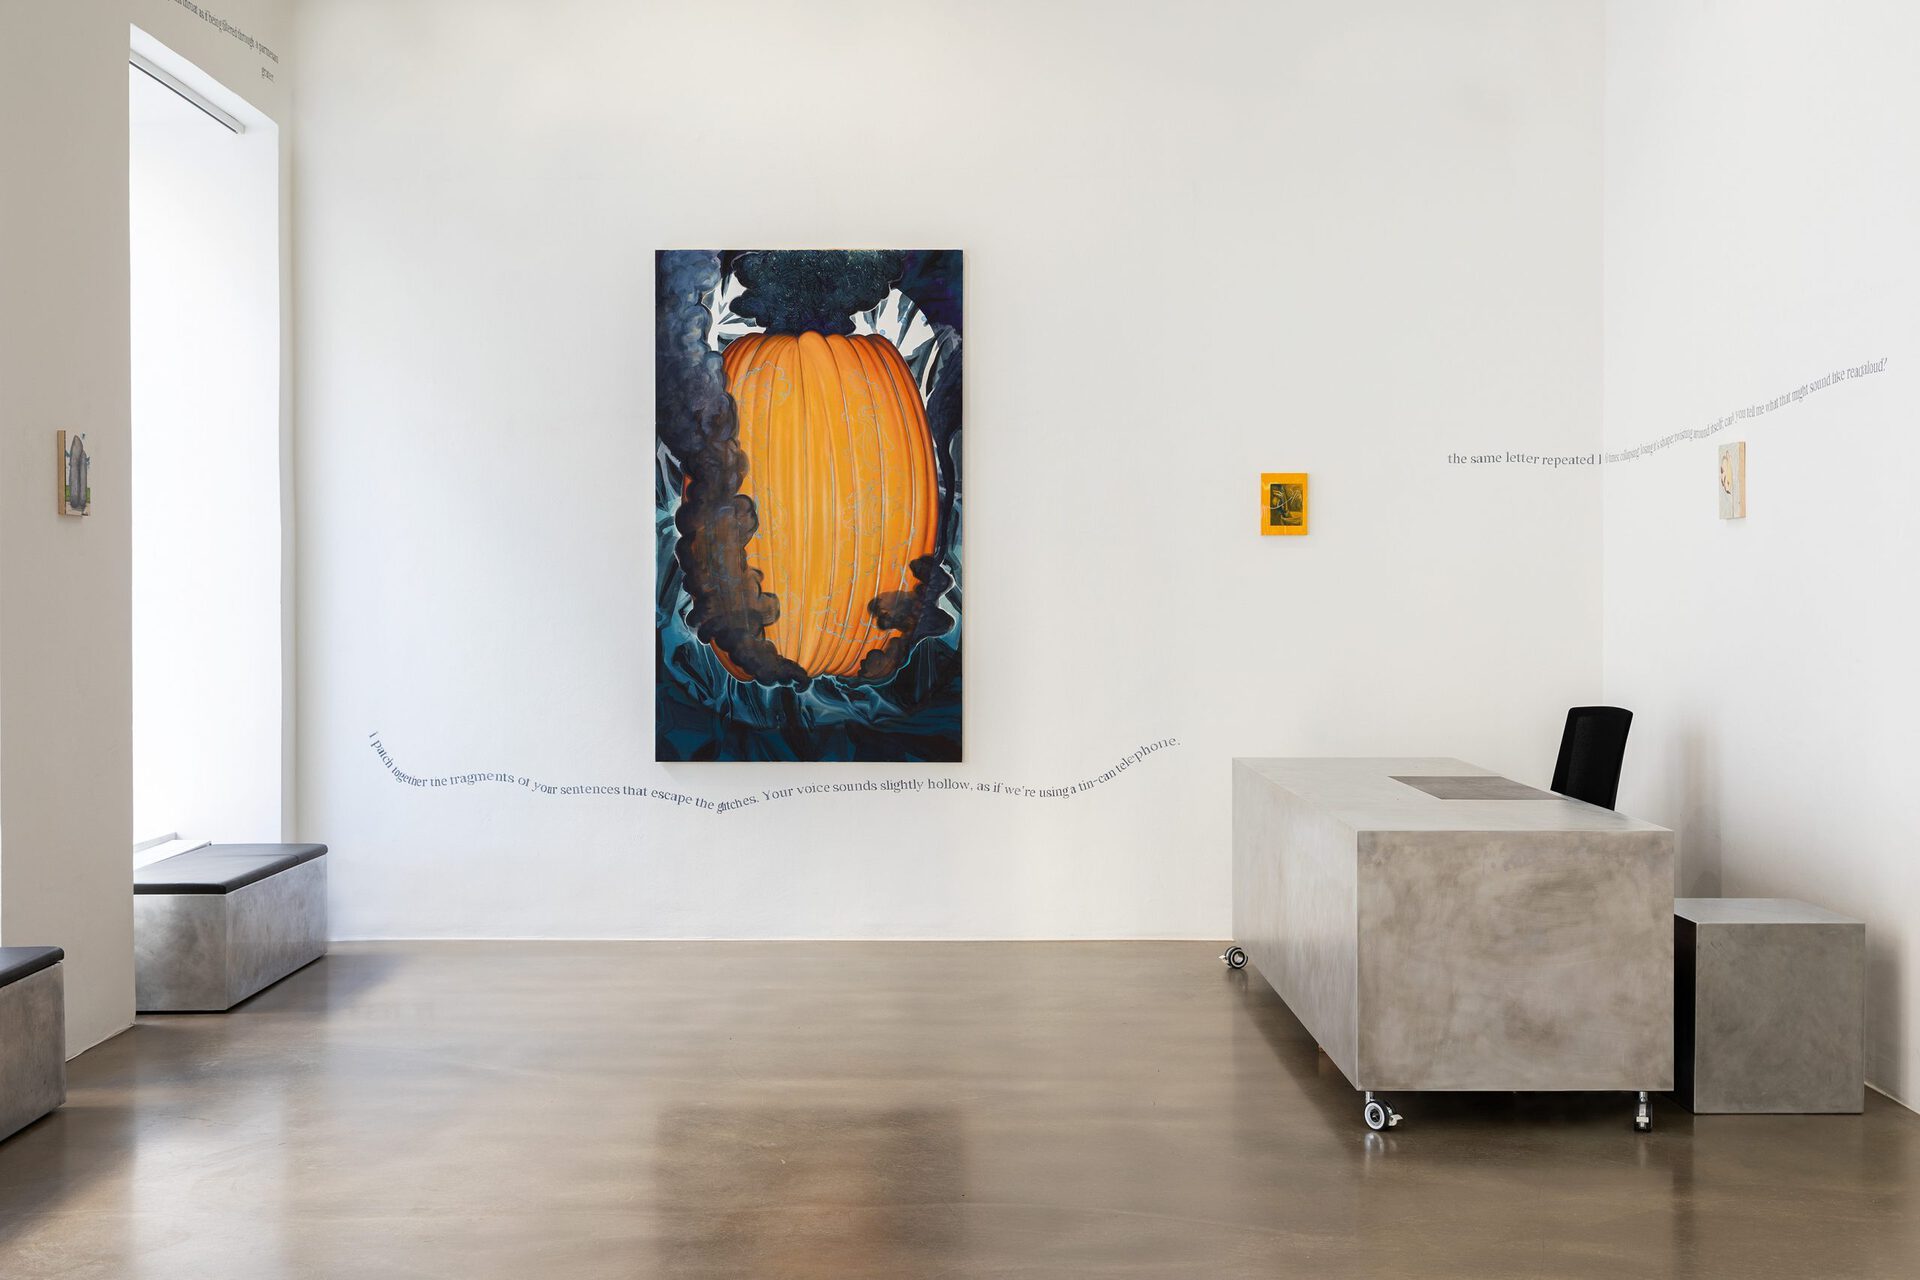 Titania Seidl, The big skirt inflating before blowing up or The monumental pumpkin lantern igniting before glowing up, 2021, 200x120 cm, watercolor and oil on canvas, installation view